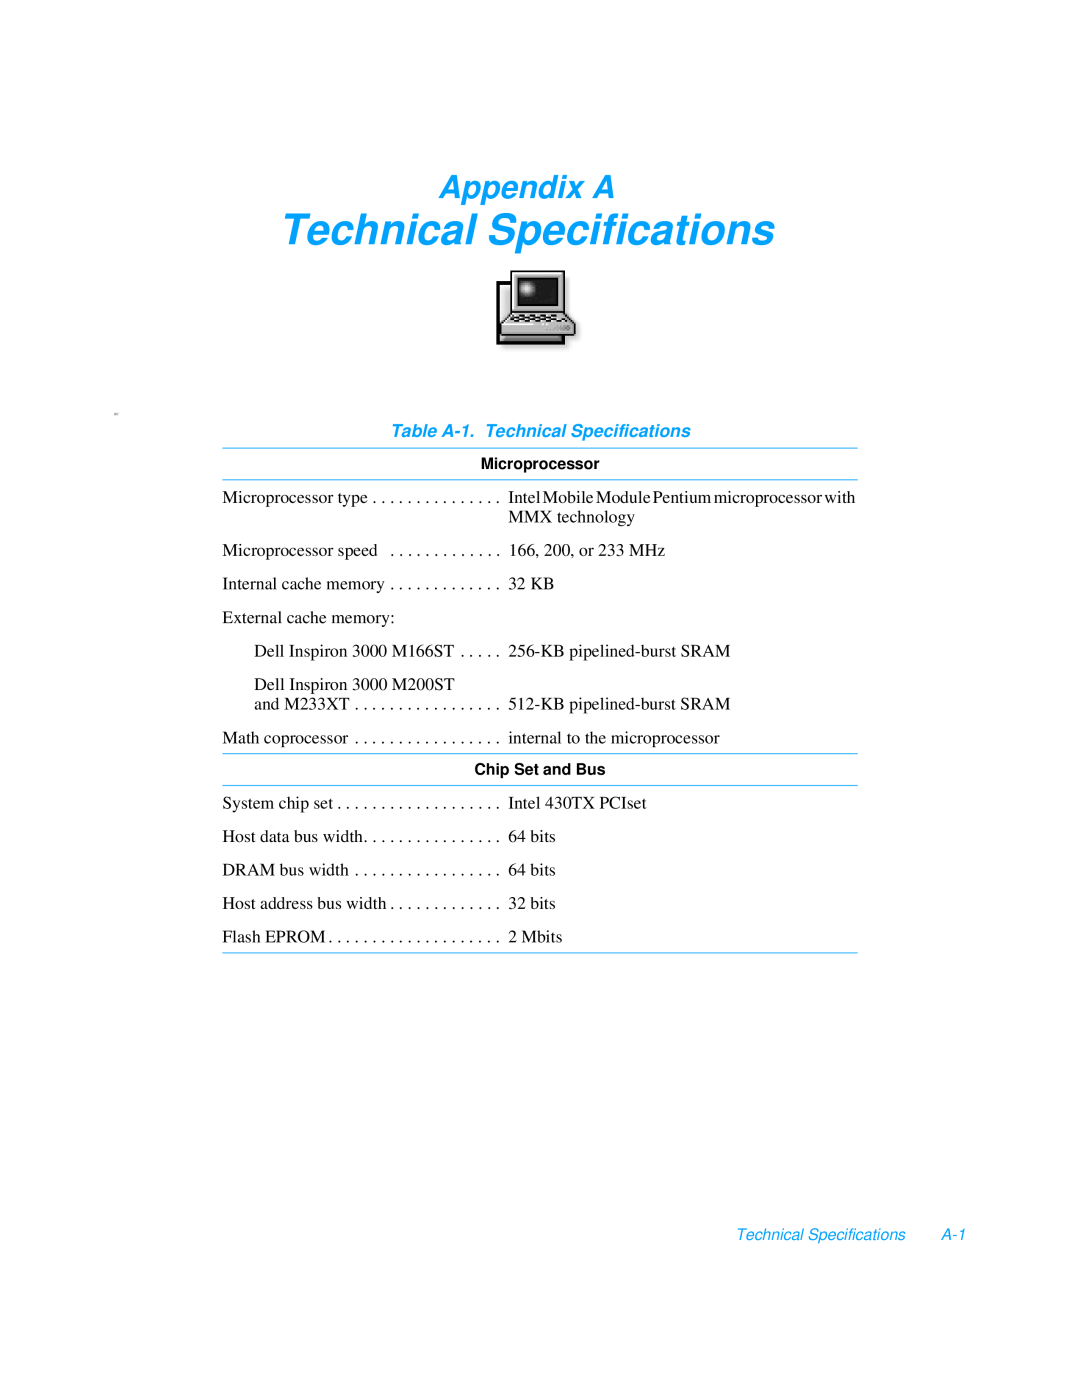 Dell 3000 manual Appendix A, Table A-1. Technical Specifications 